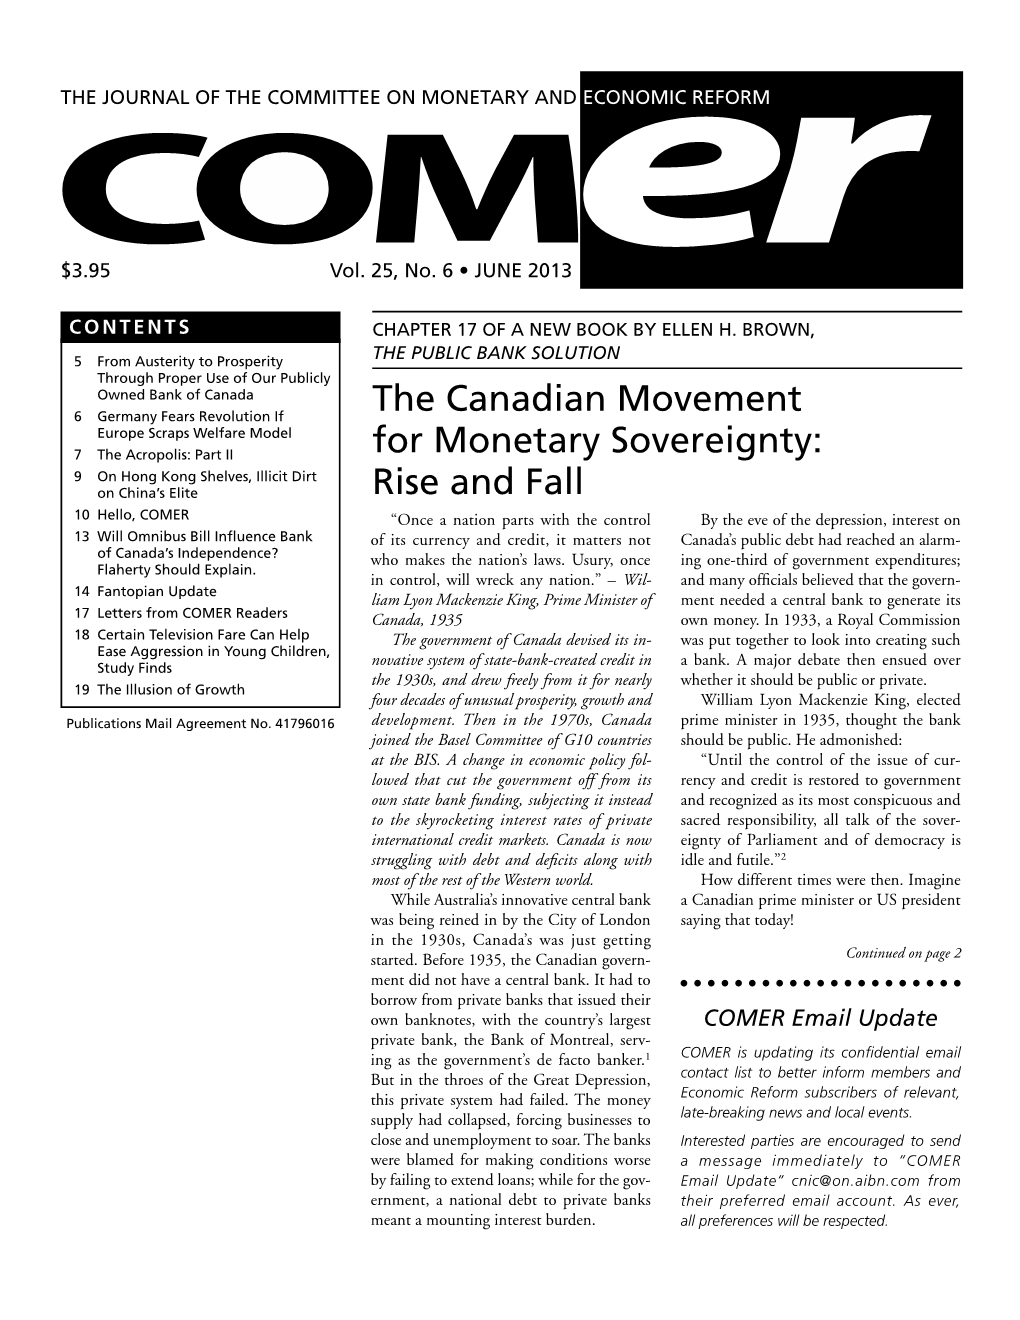 The Canadian Movement for Monetary Sovereignty